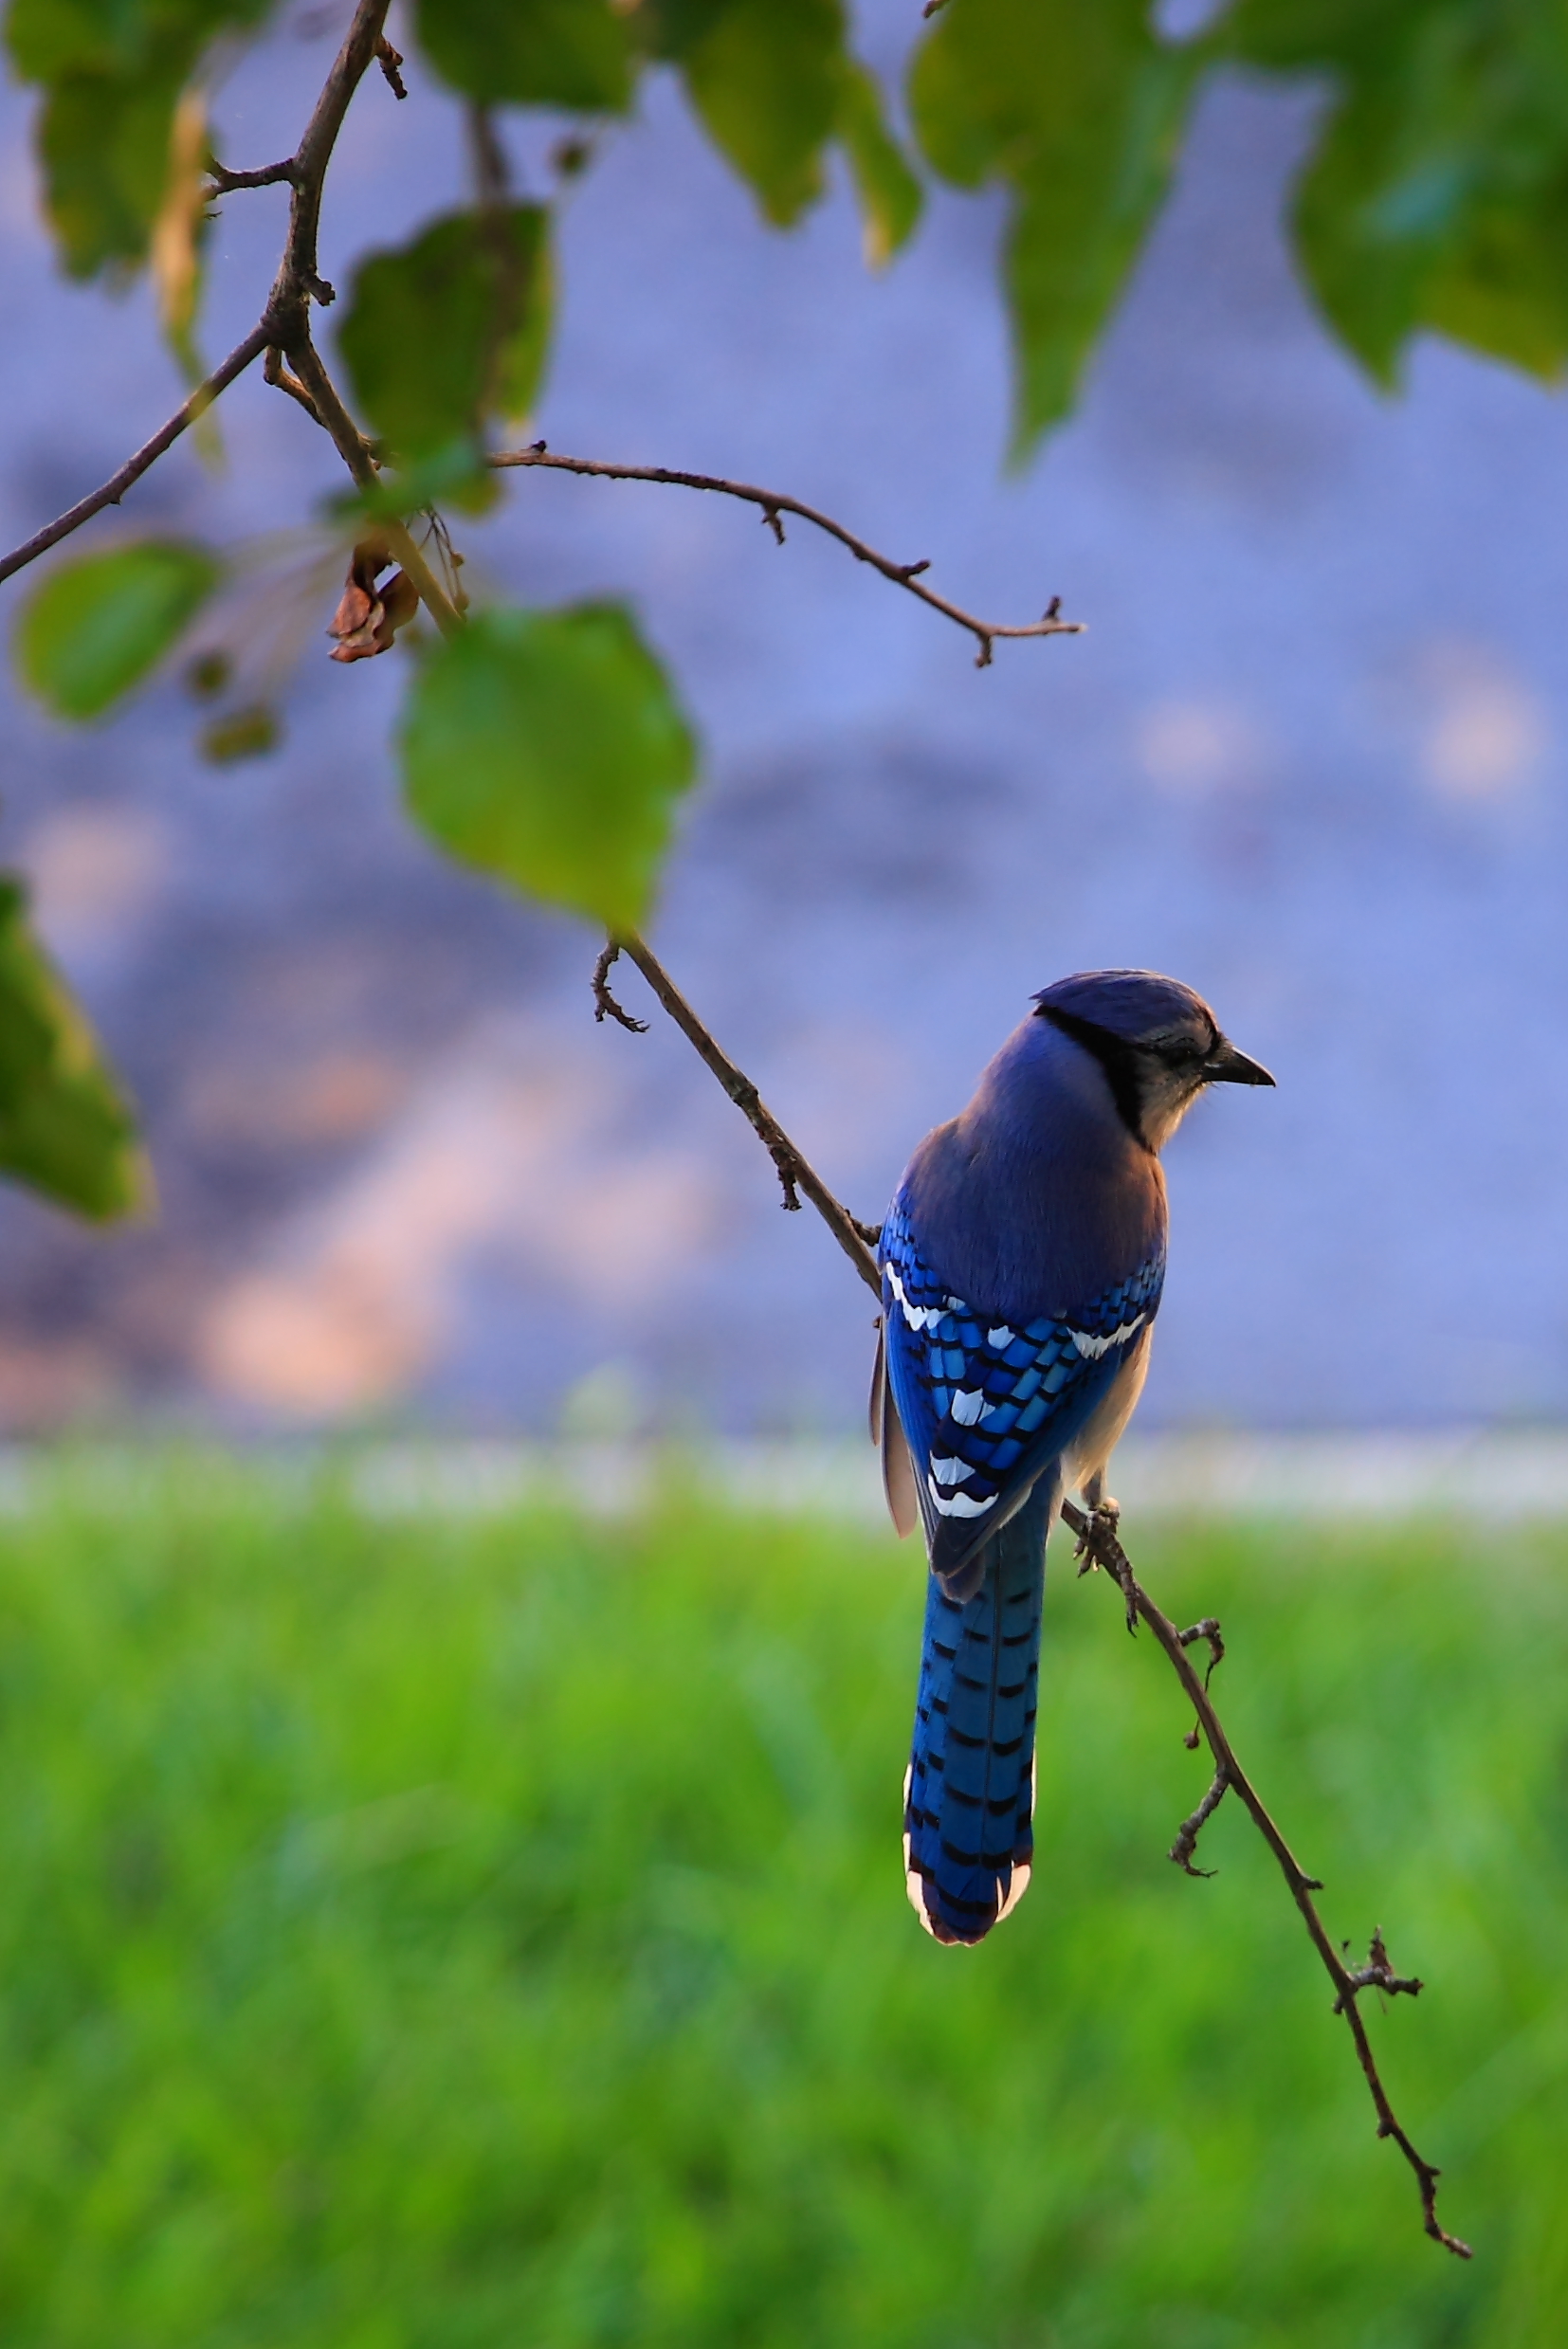 88706 download wallpaper bird, animals, feather, blue, beak, branch screensavers and pictures for free